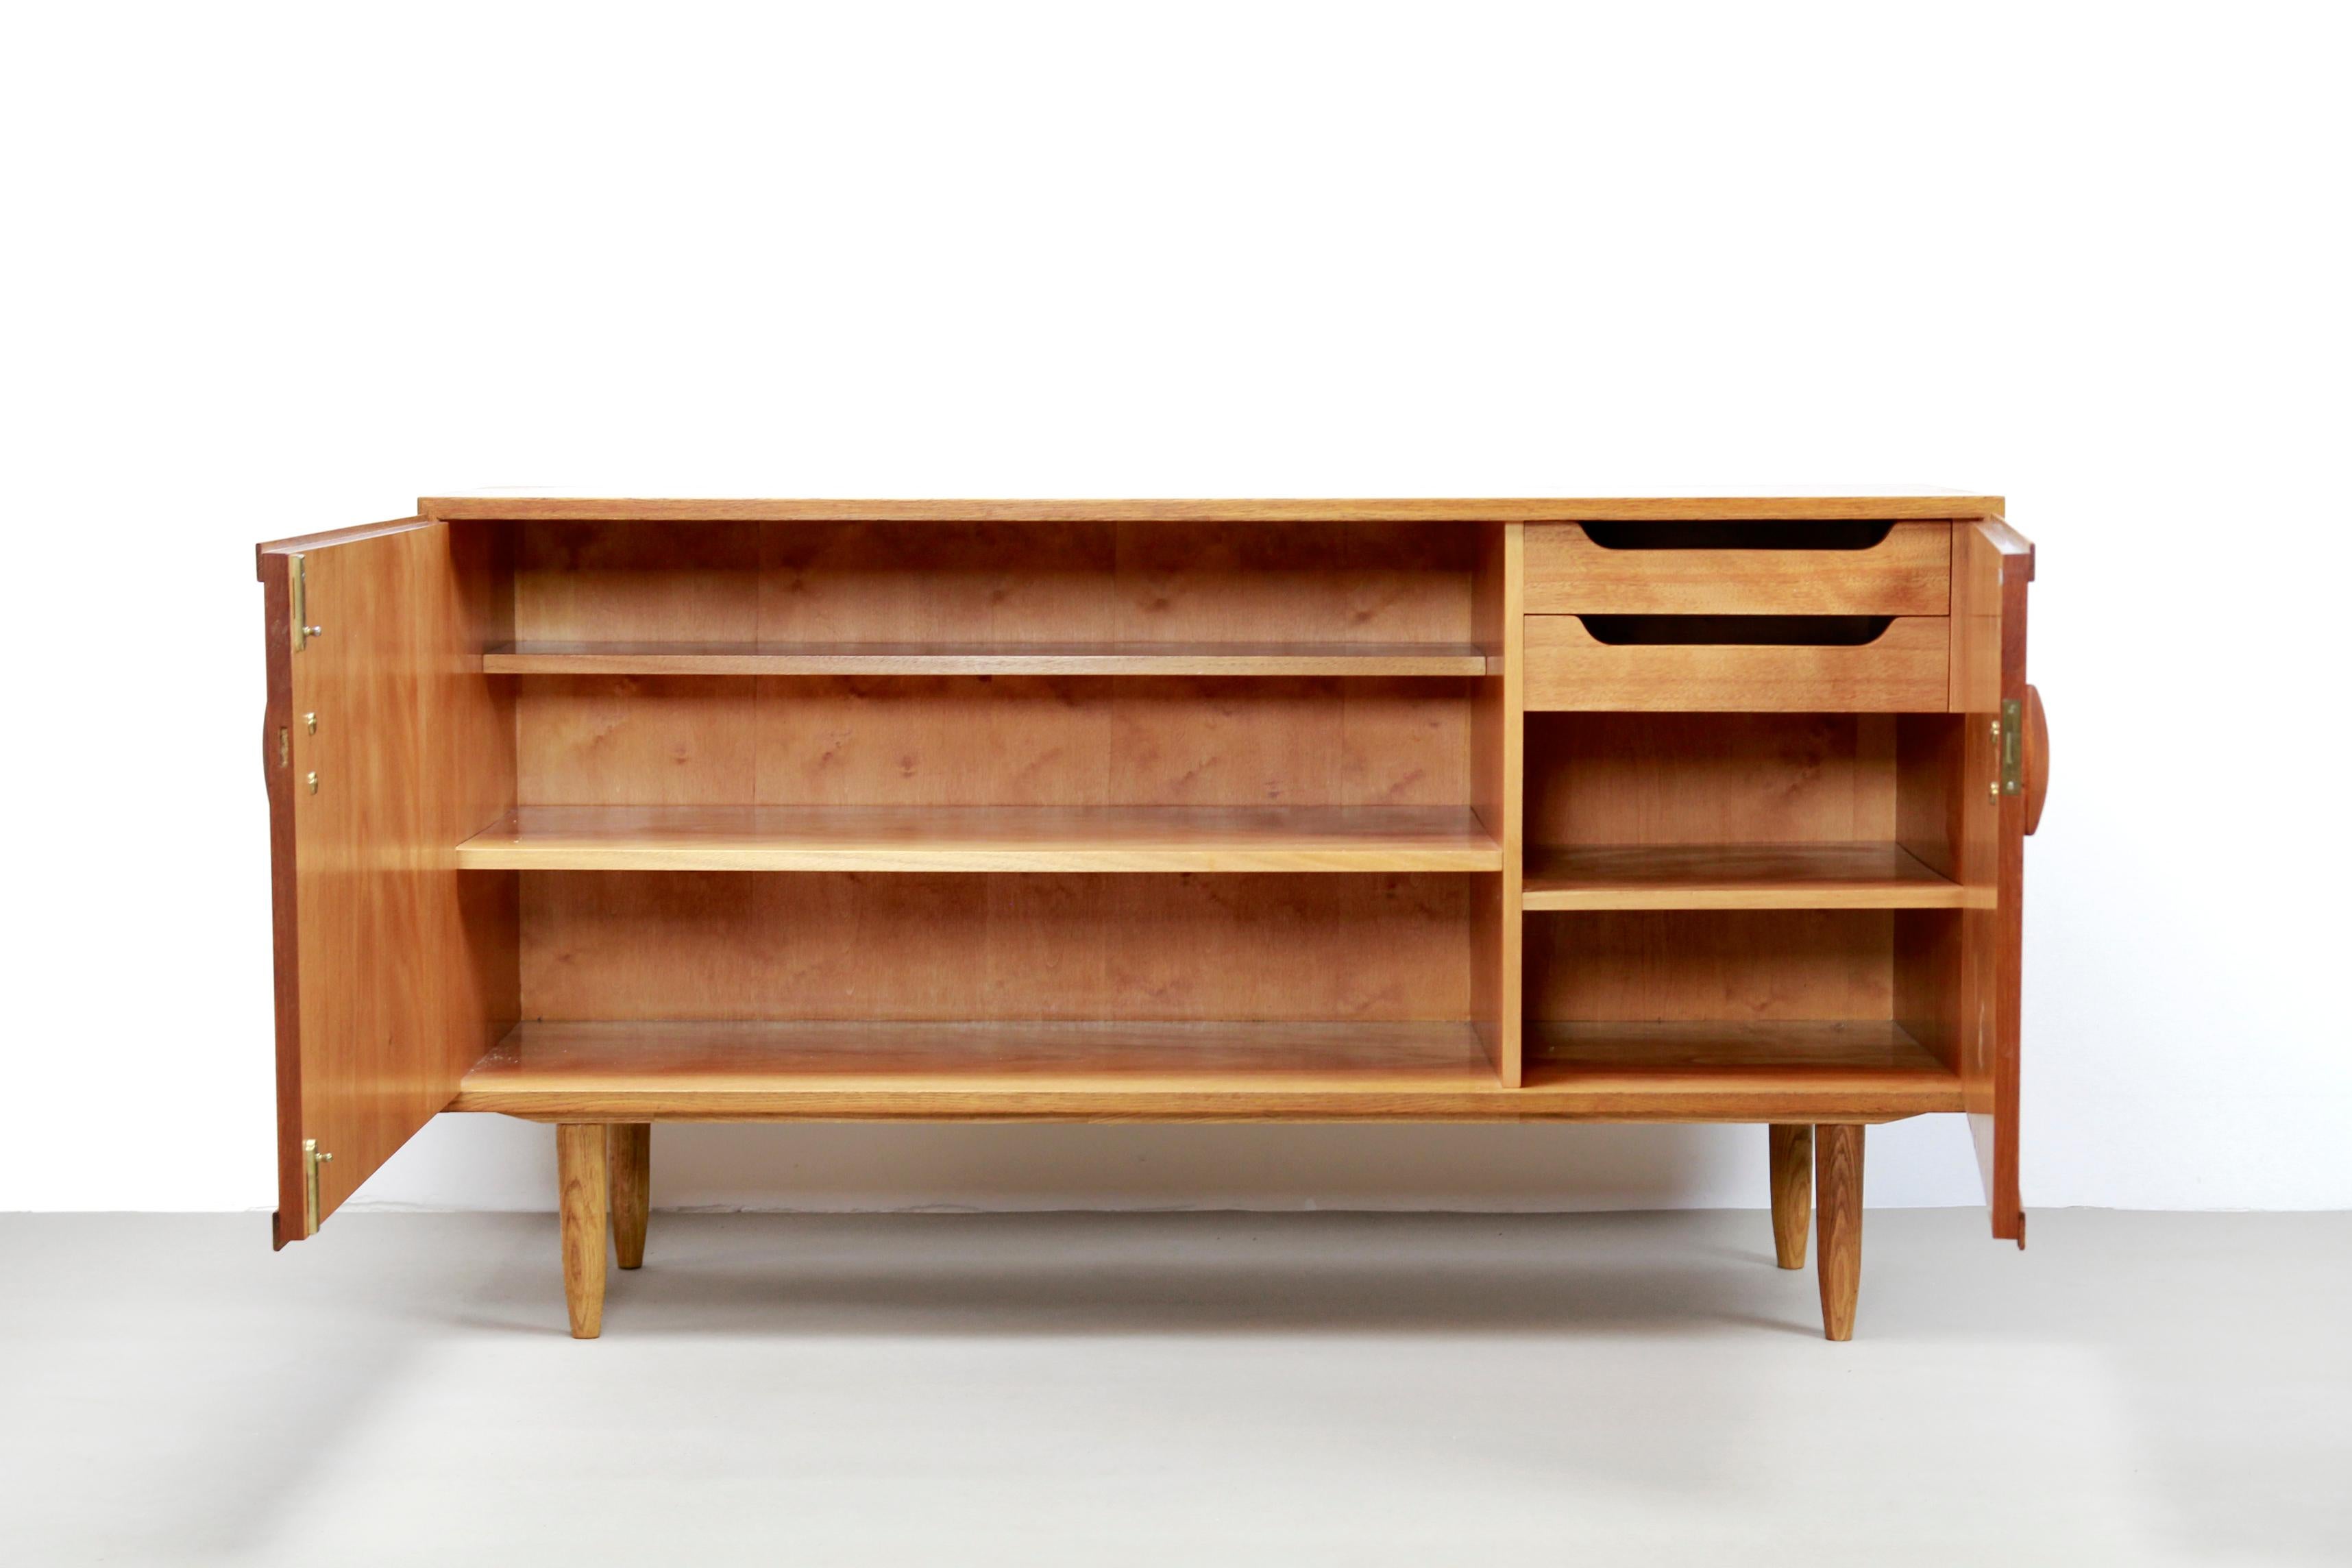 Typical Mid-Century Modern designed sideboard made of a combination of teak and oakwood. This Minimalist sideboard is from Denmark and produced by Treman in the 1960s. The sideboard has two doors with a shelf and two drawers behind it and is 140 cm